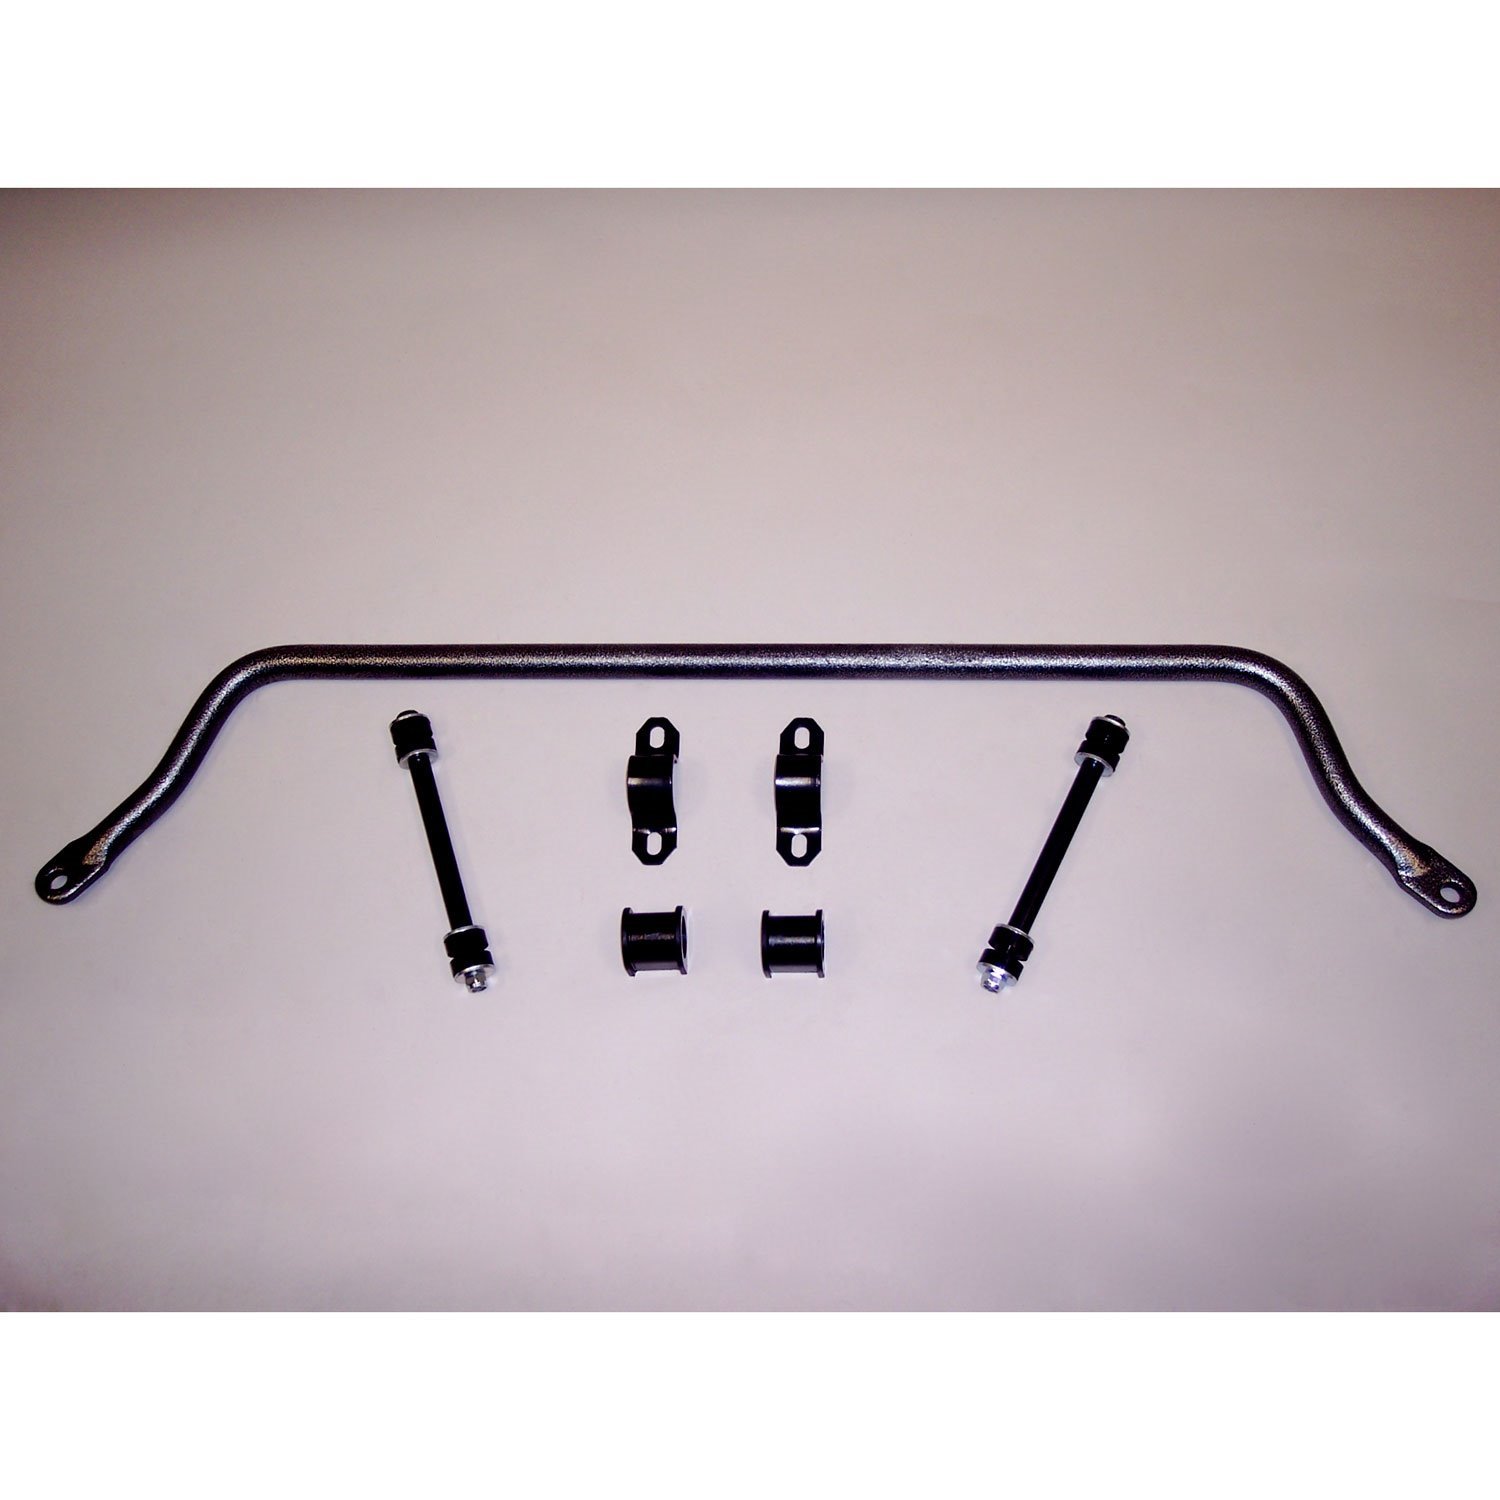 Front Sway Bar for 1998-2011 Ford Ranger and 1998-2006 Mazda 2WD